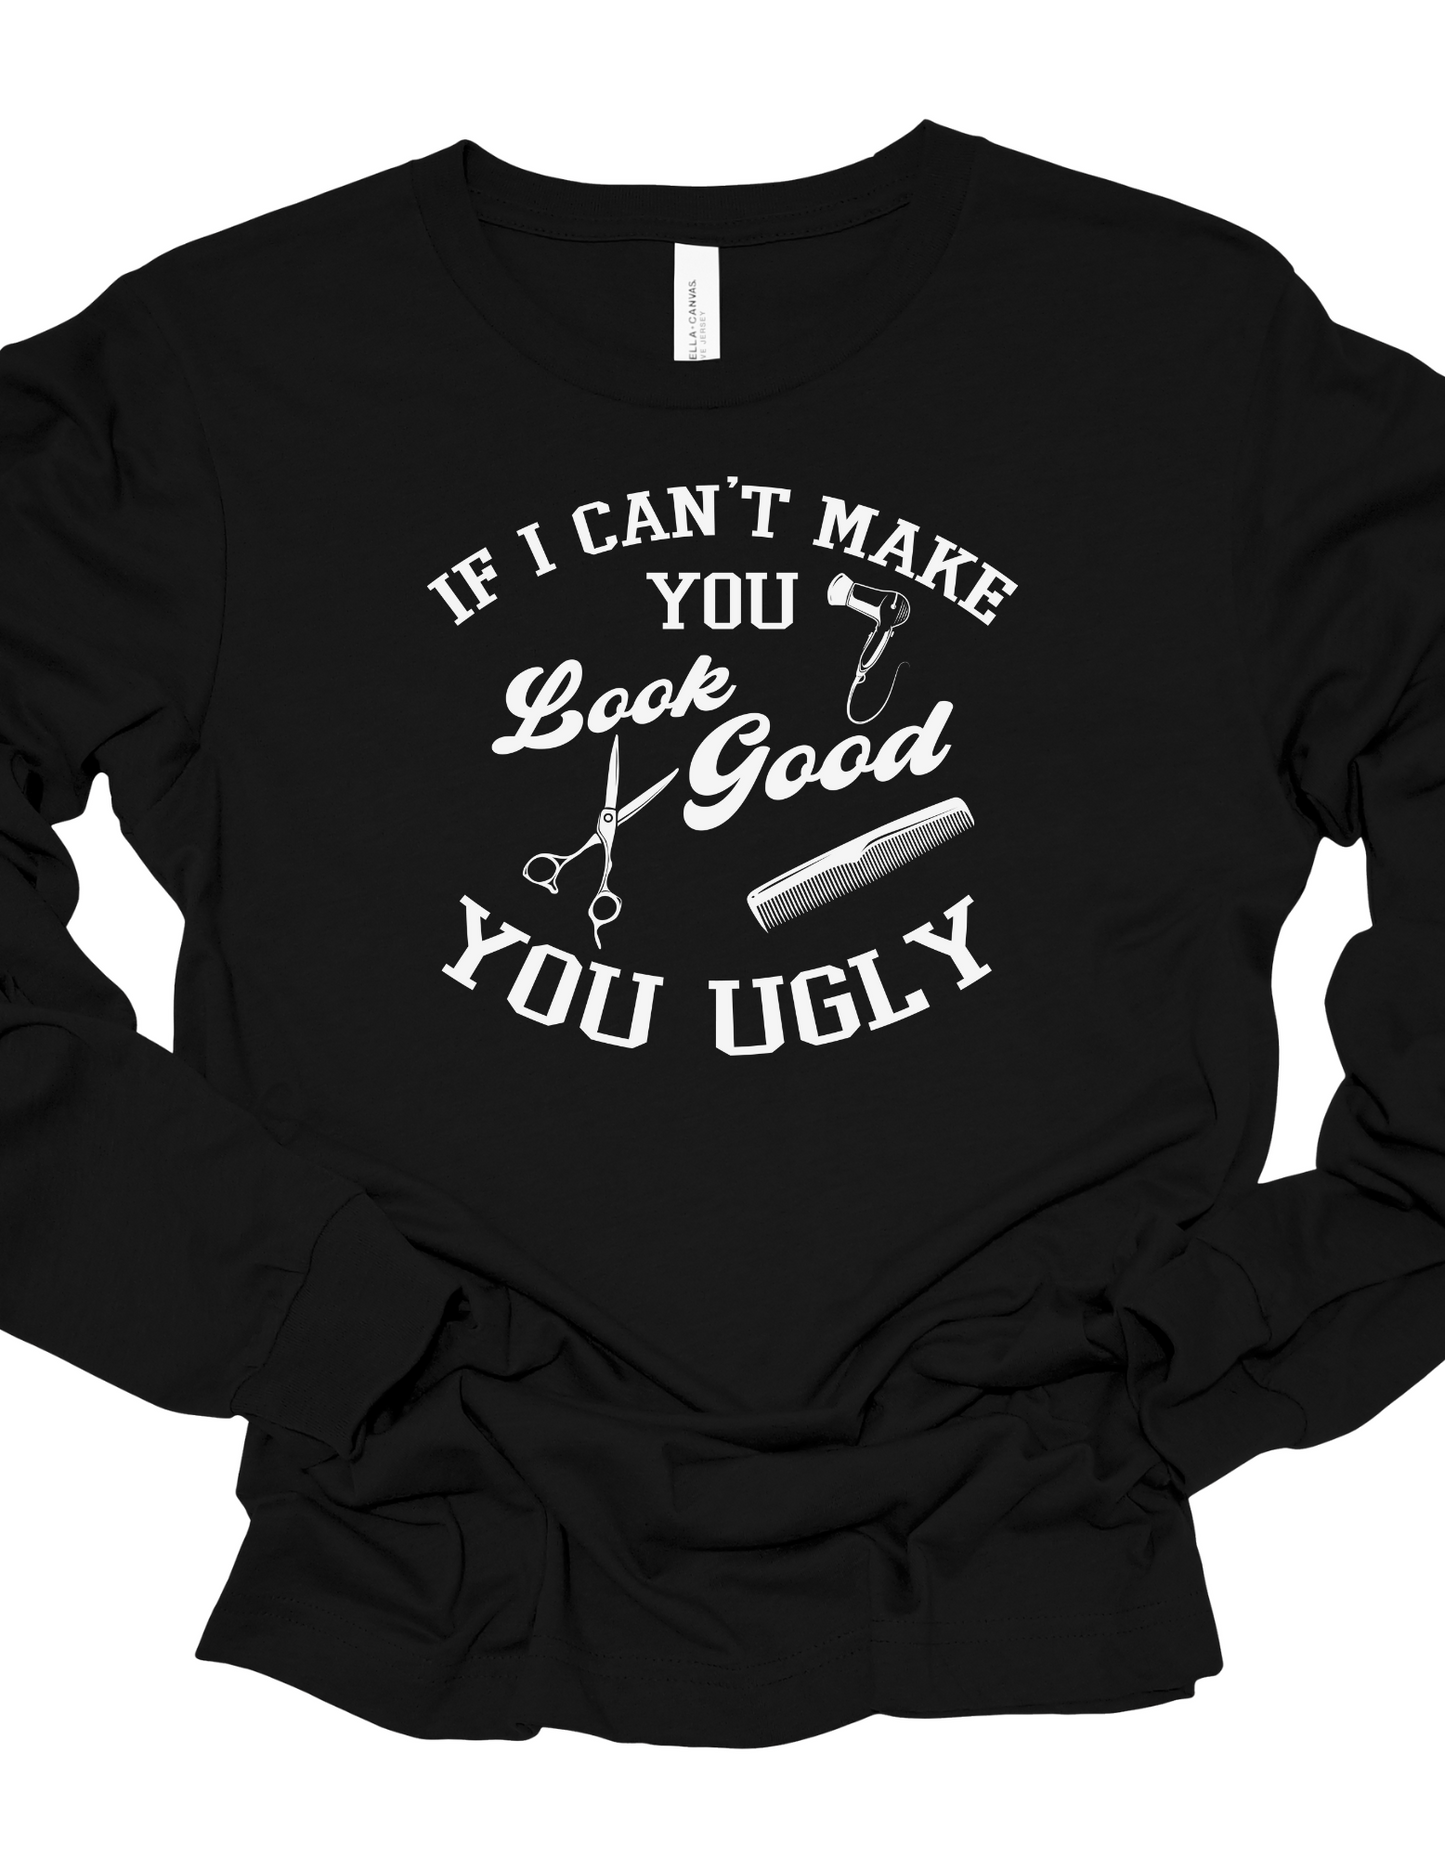 If I cant make you look good you ugly T-shirt